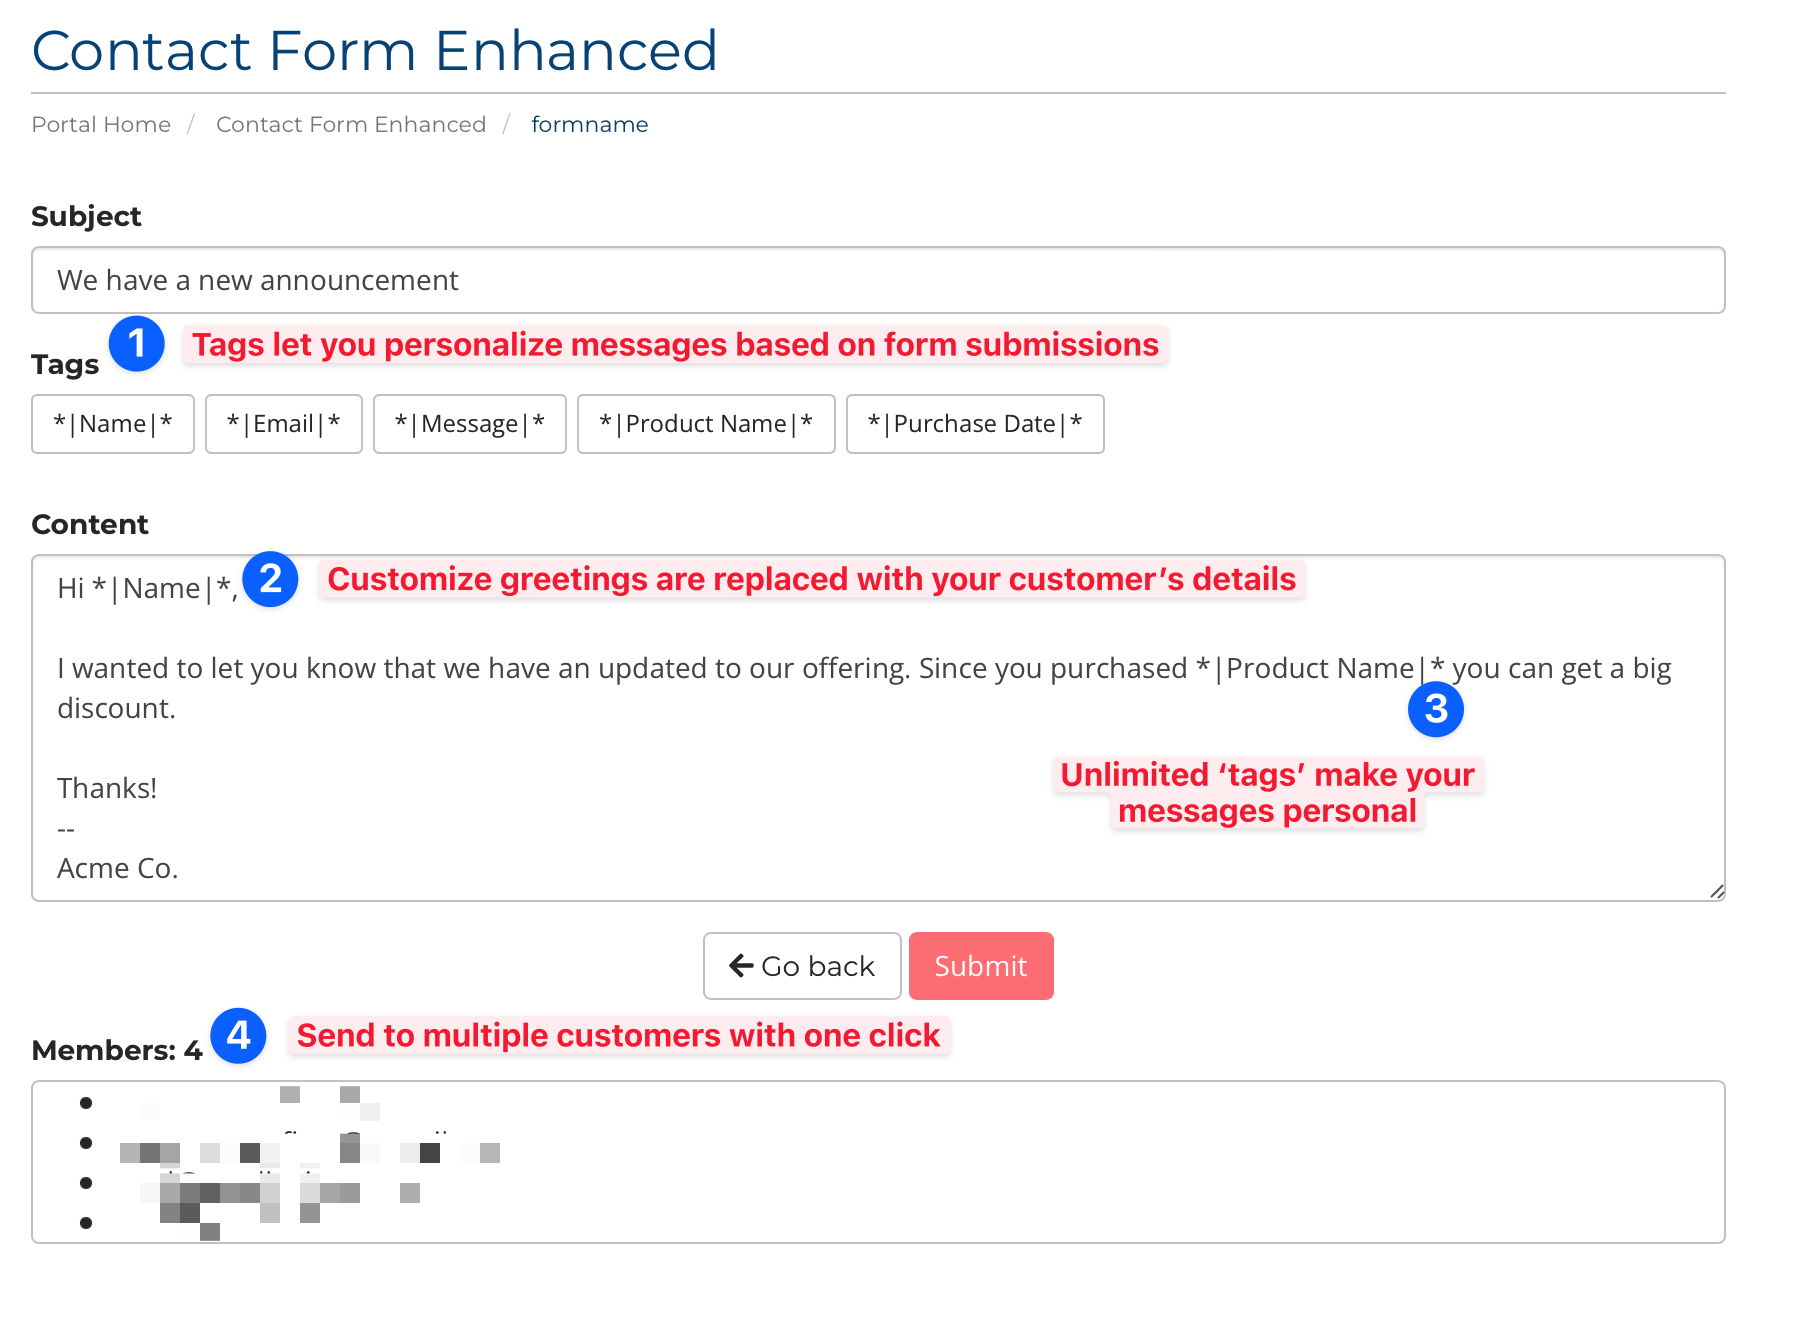 Mass Emails with Contact Forms Enhanced